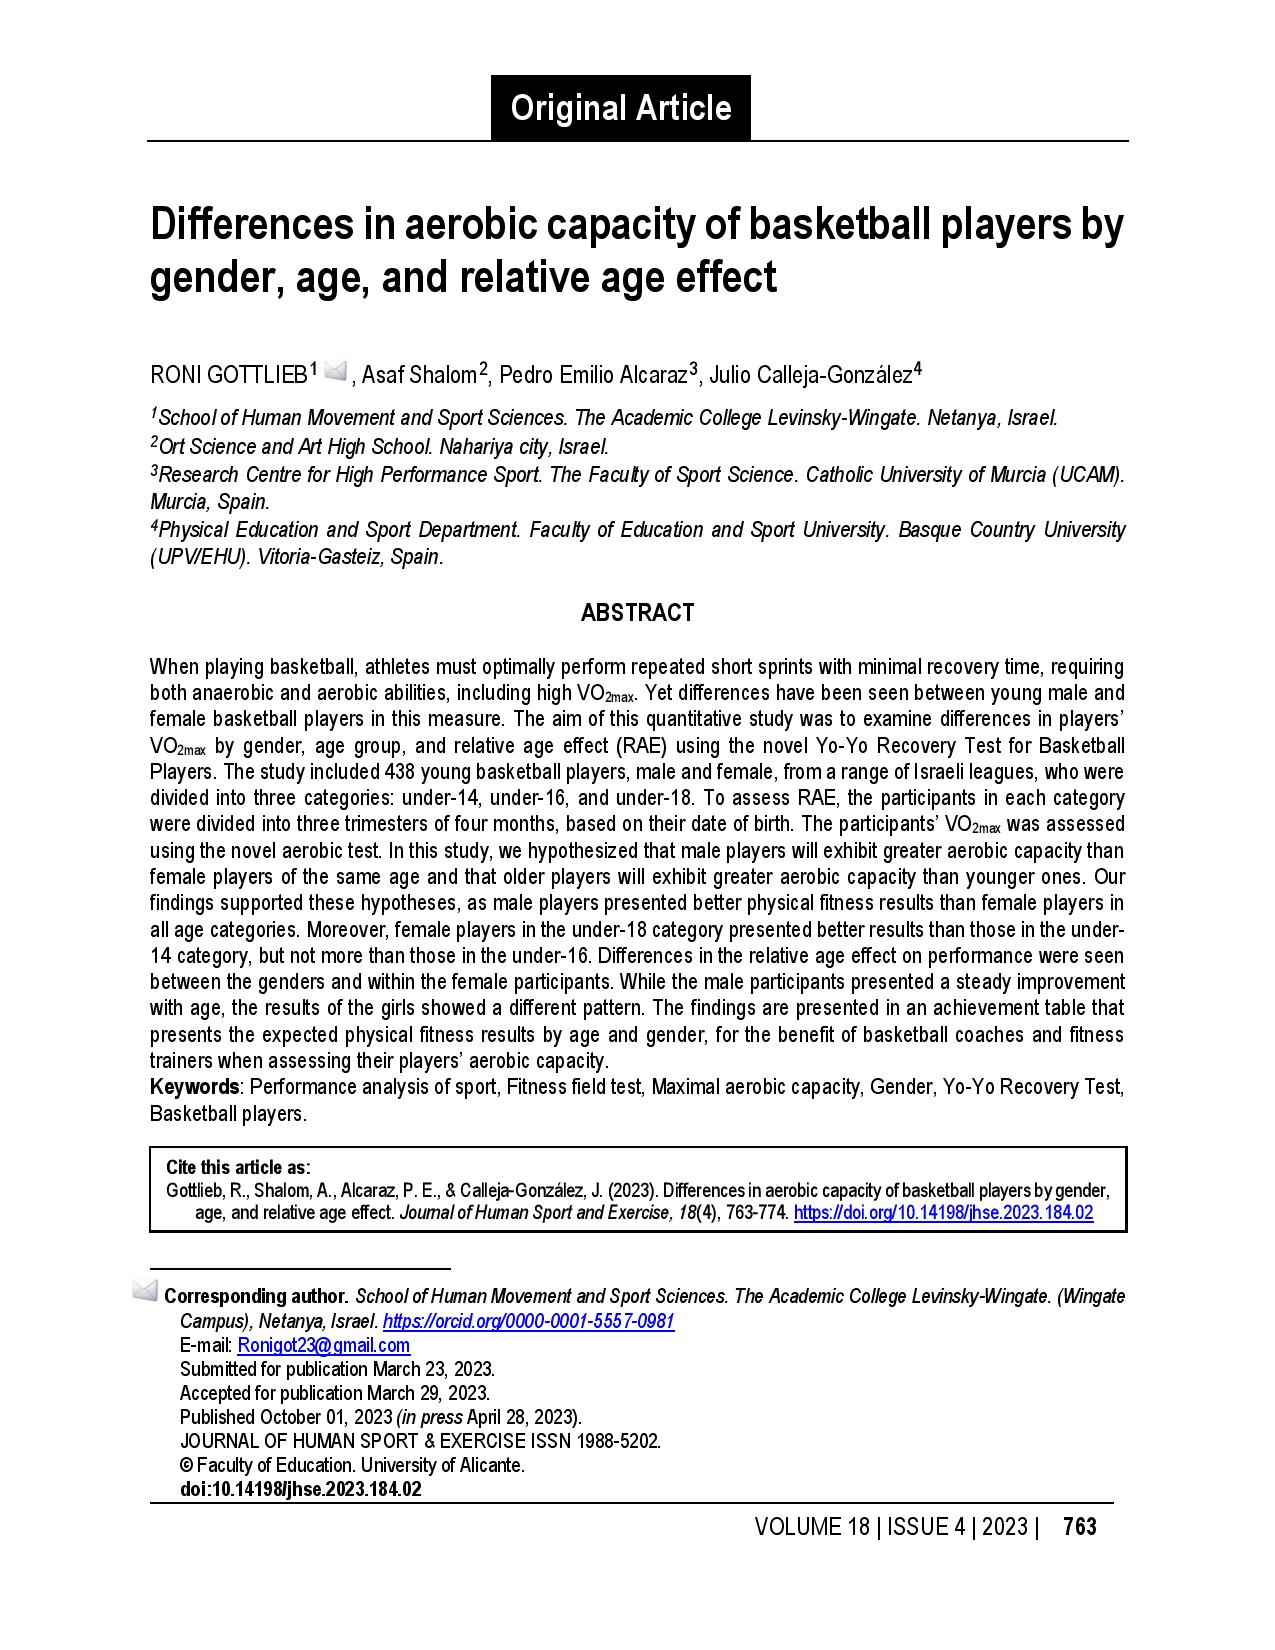 Differences in aerobic capacity of basketball players by gender, age, and relative age effect